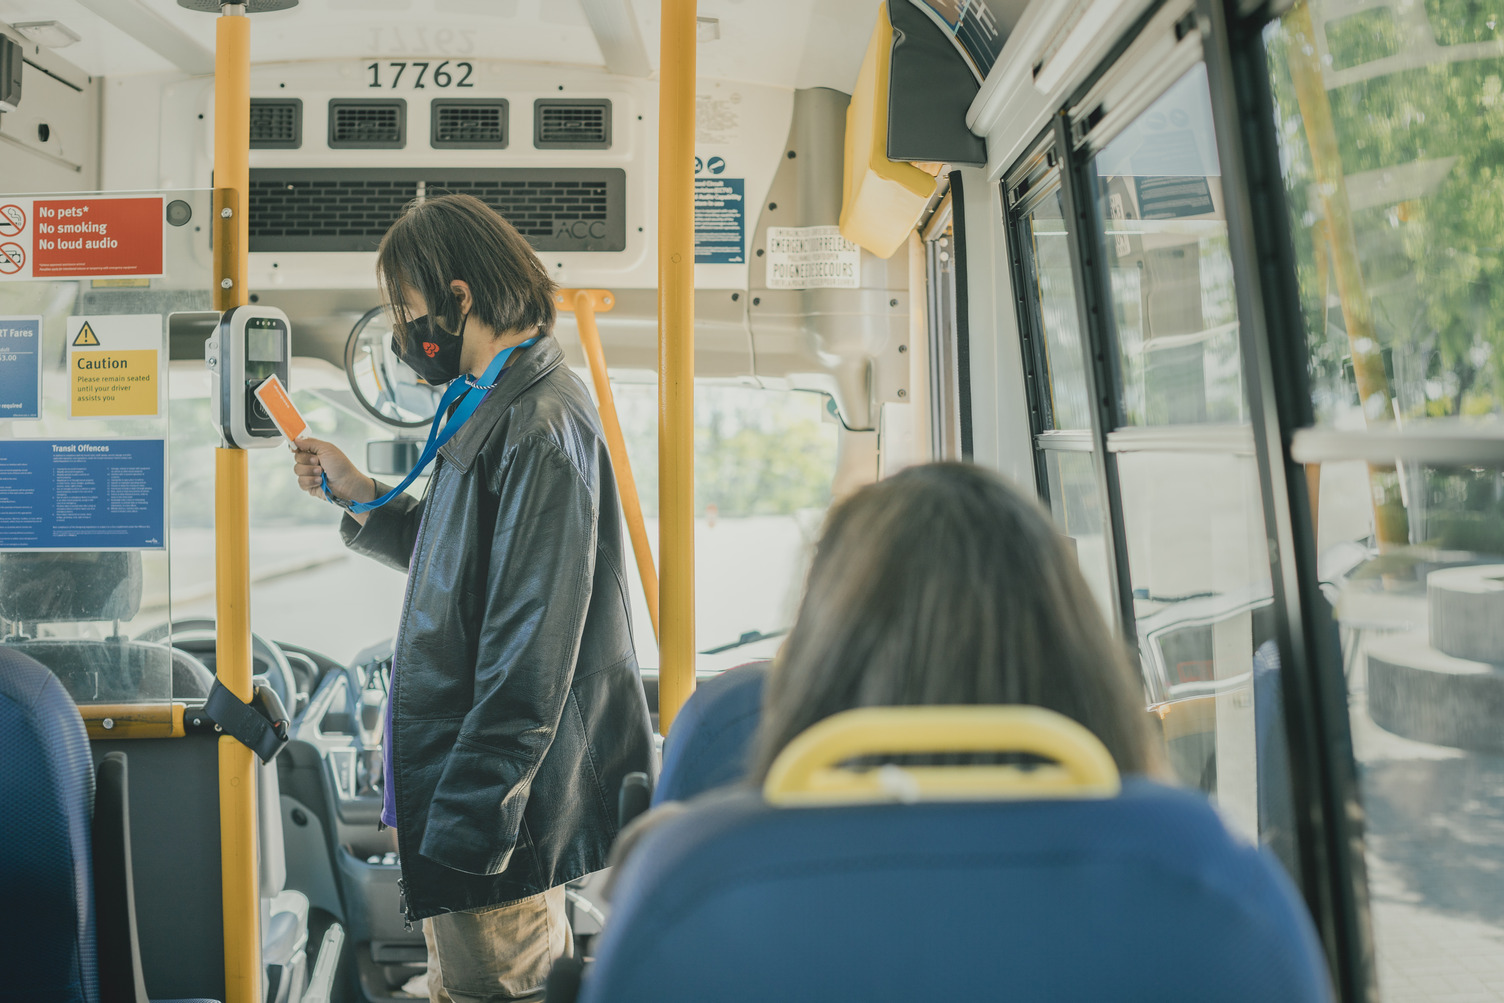 Customer taps their concession Compass Card on the HandyDART bus